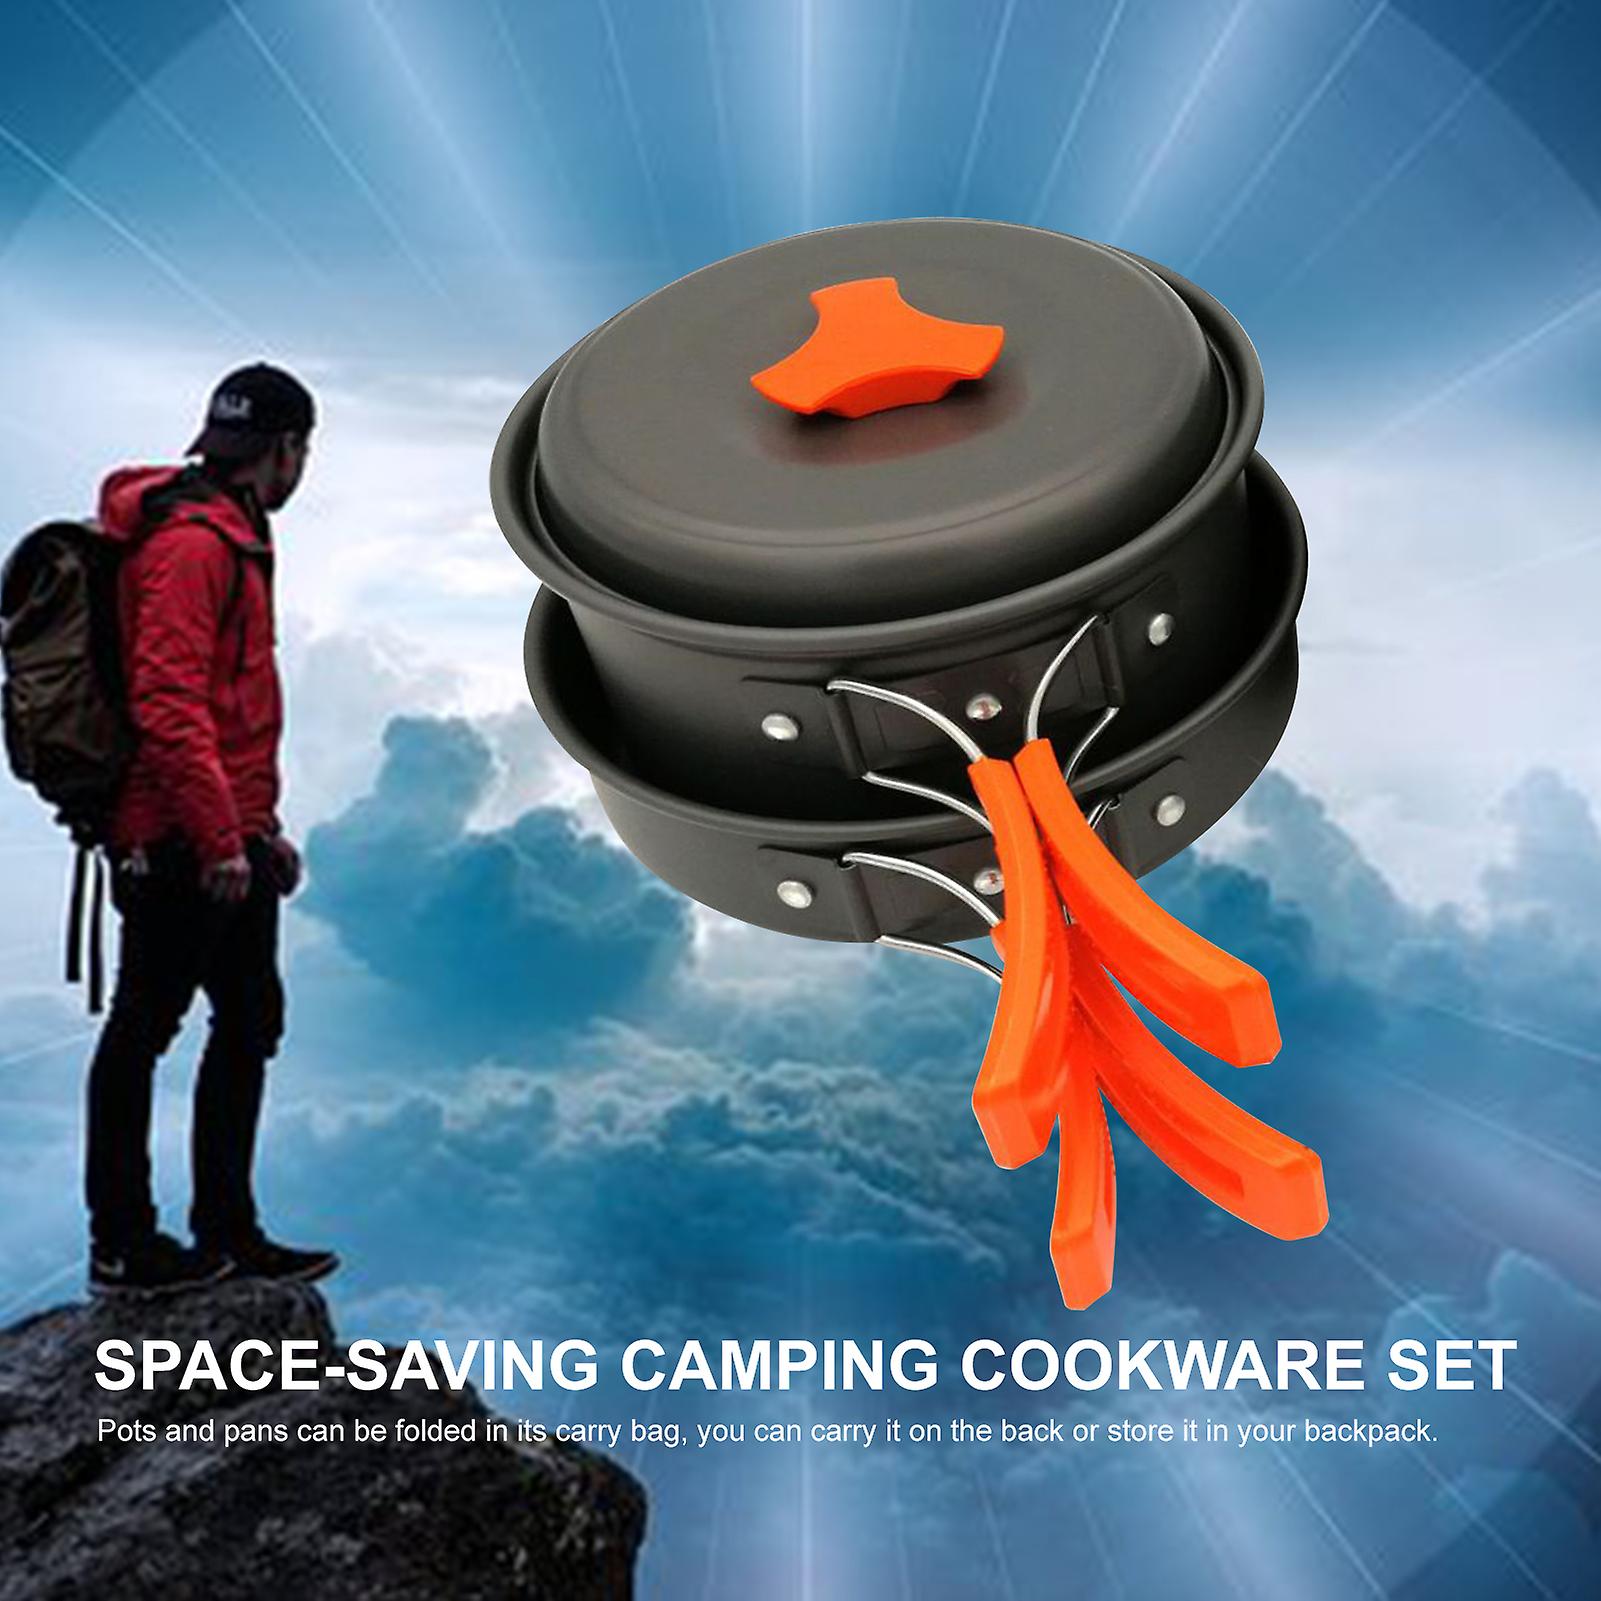 Camping Cookware Set Campfire Cooking Utensils Folding Cookset Portable Outdoor Hiking Backpacking Pot Pan Bowls Spoon Mesh Carry Bag Dishcloth No.287